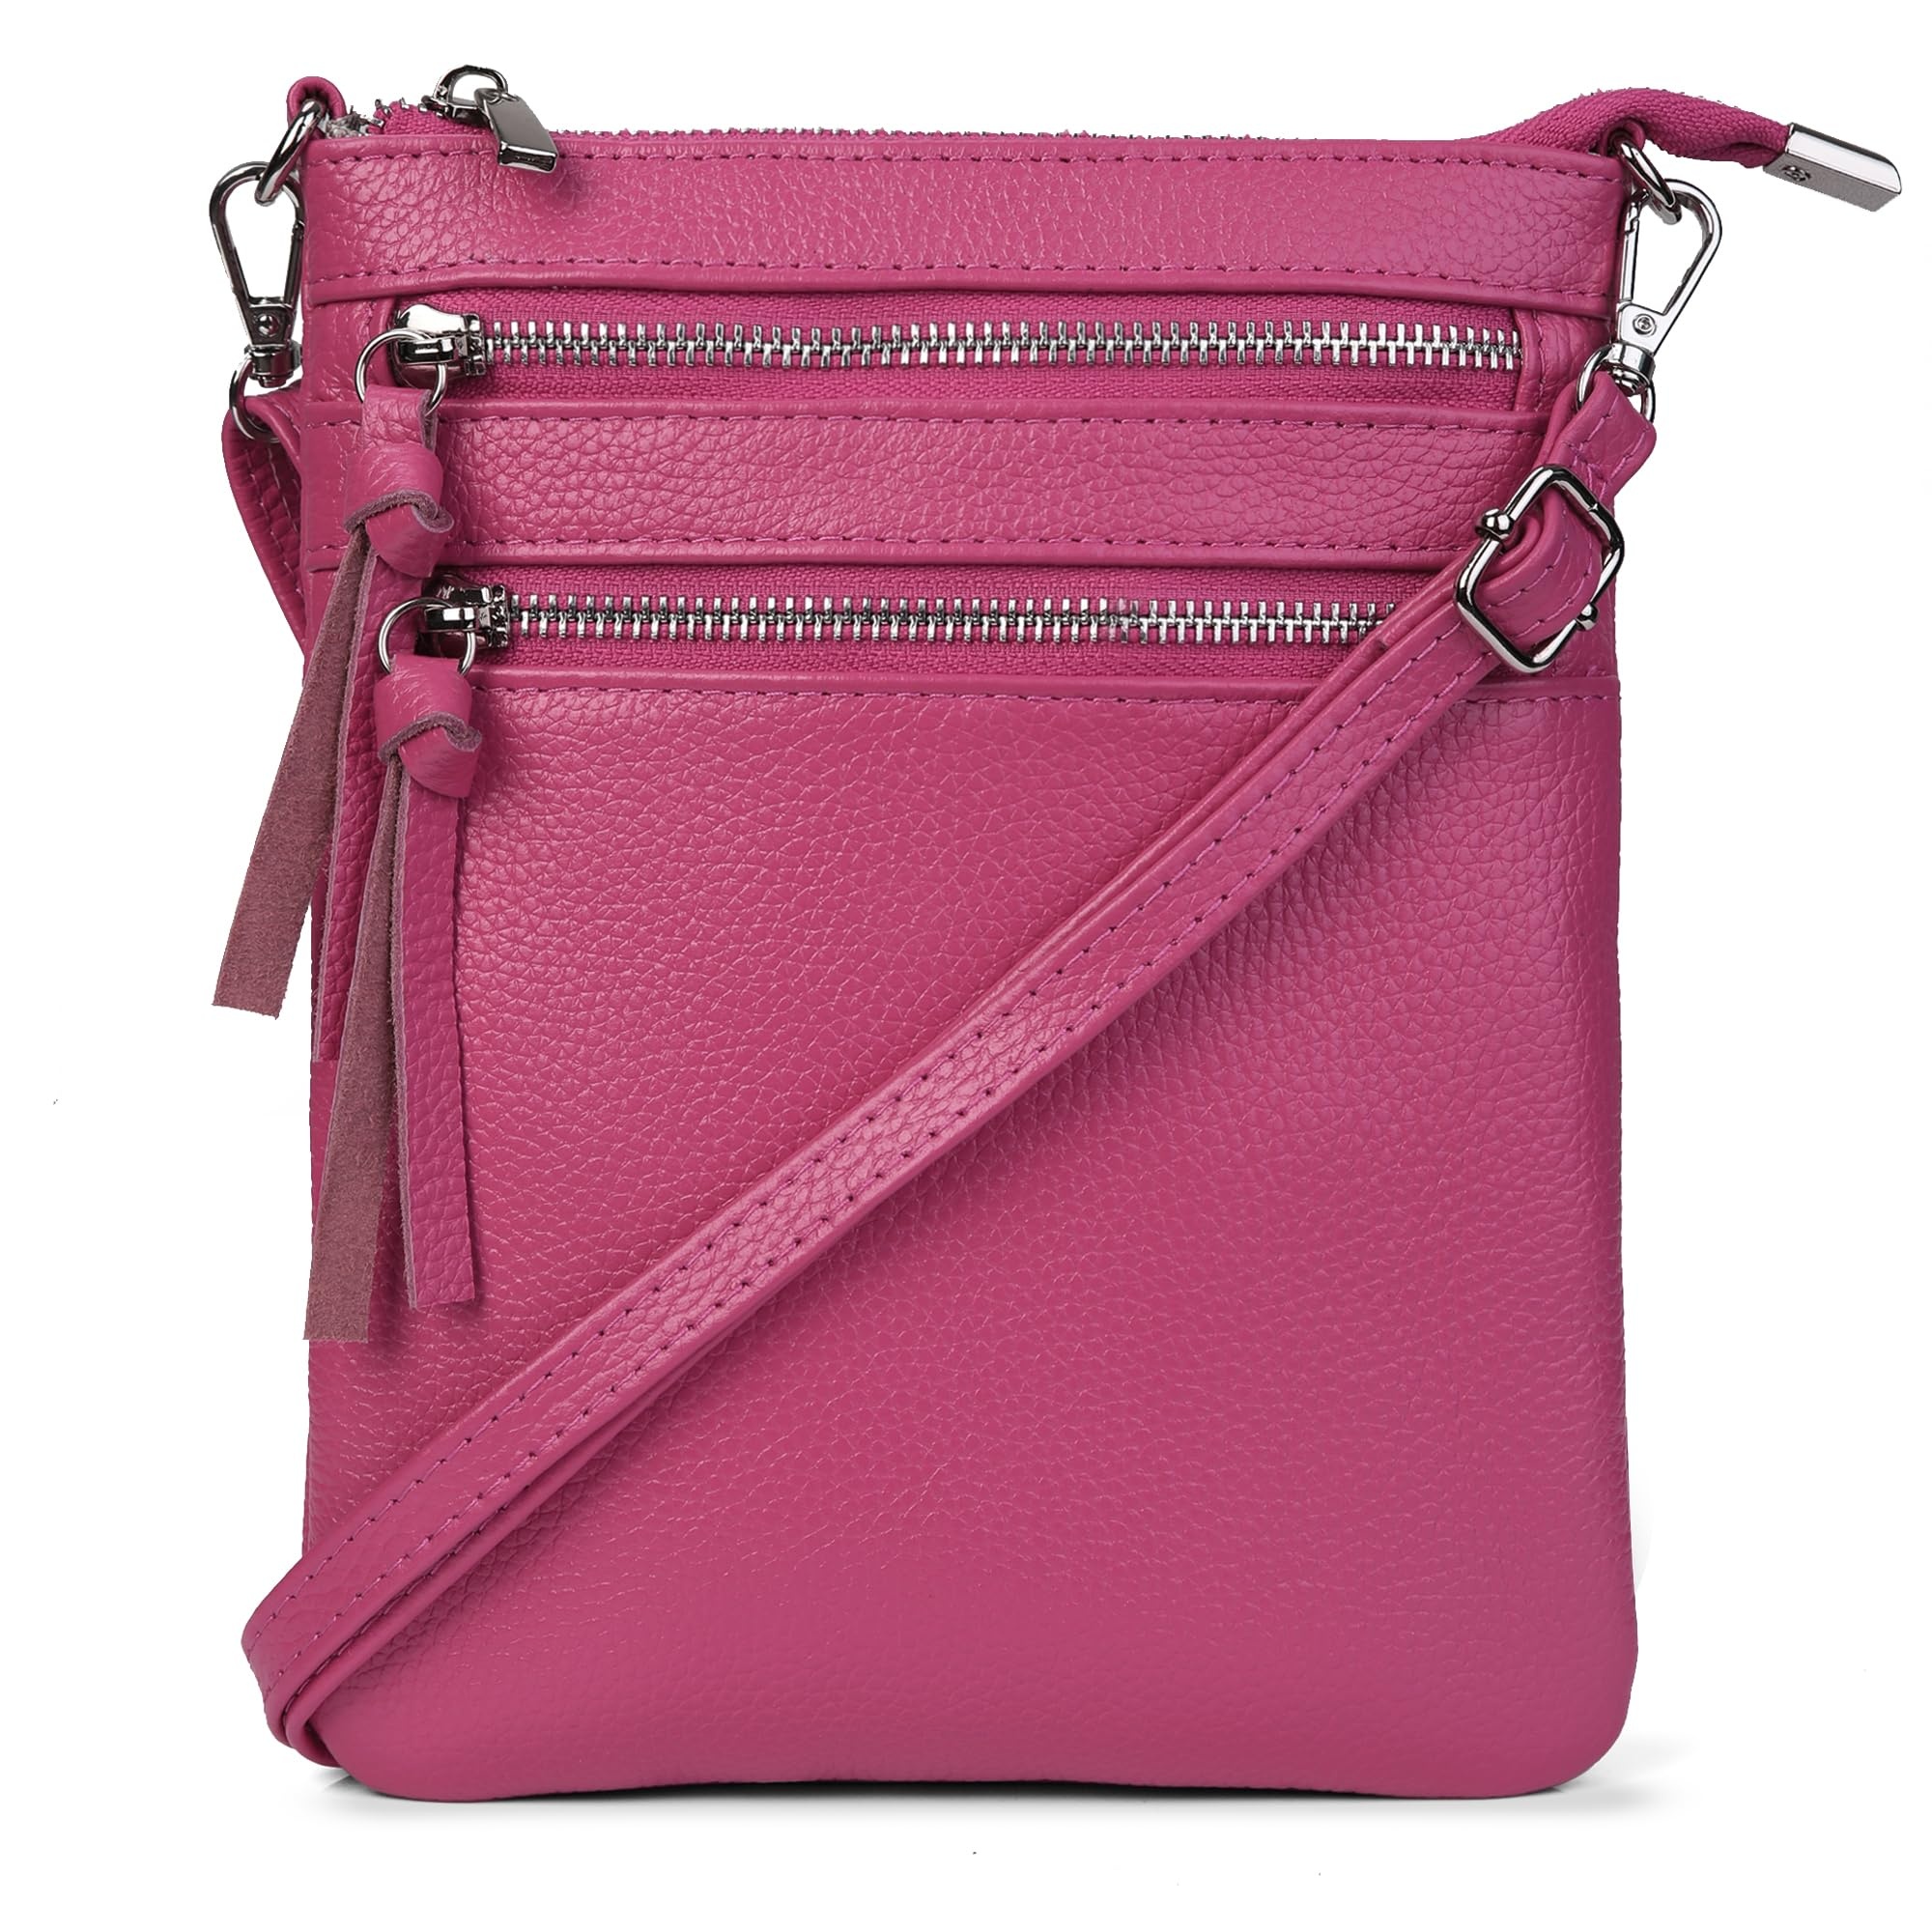 befen Small Leather Crossbody Purses for Women, Multi Pocket Cross Body Bag Zipper Purse and Handbags, Functional Slim Shoulder Bag with Adjustable Long Strap (Hot Pink) - 8